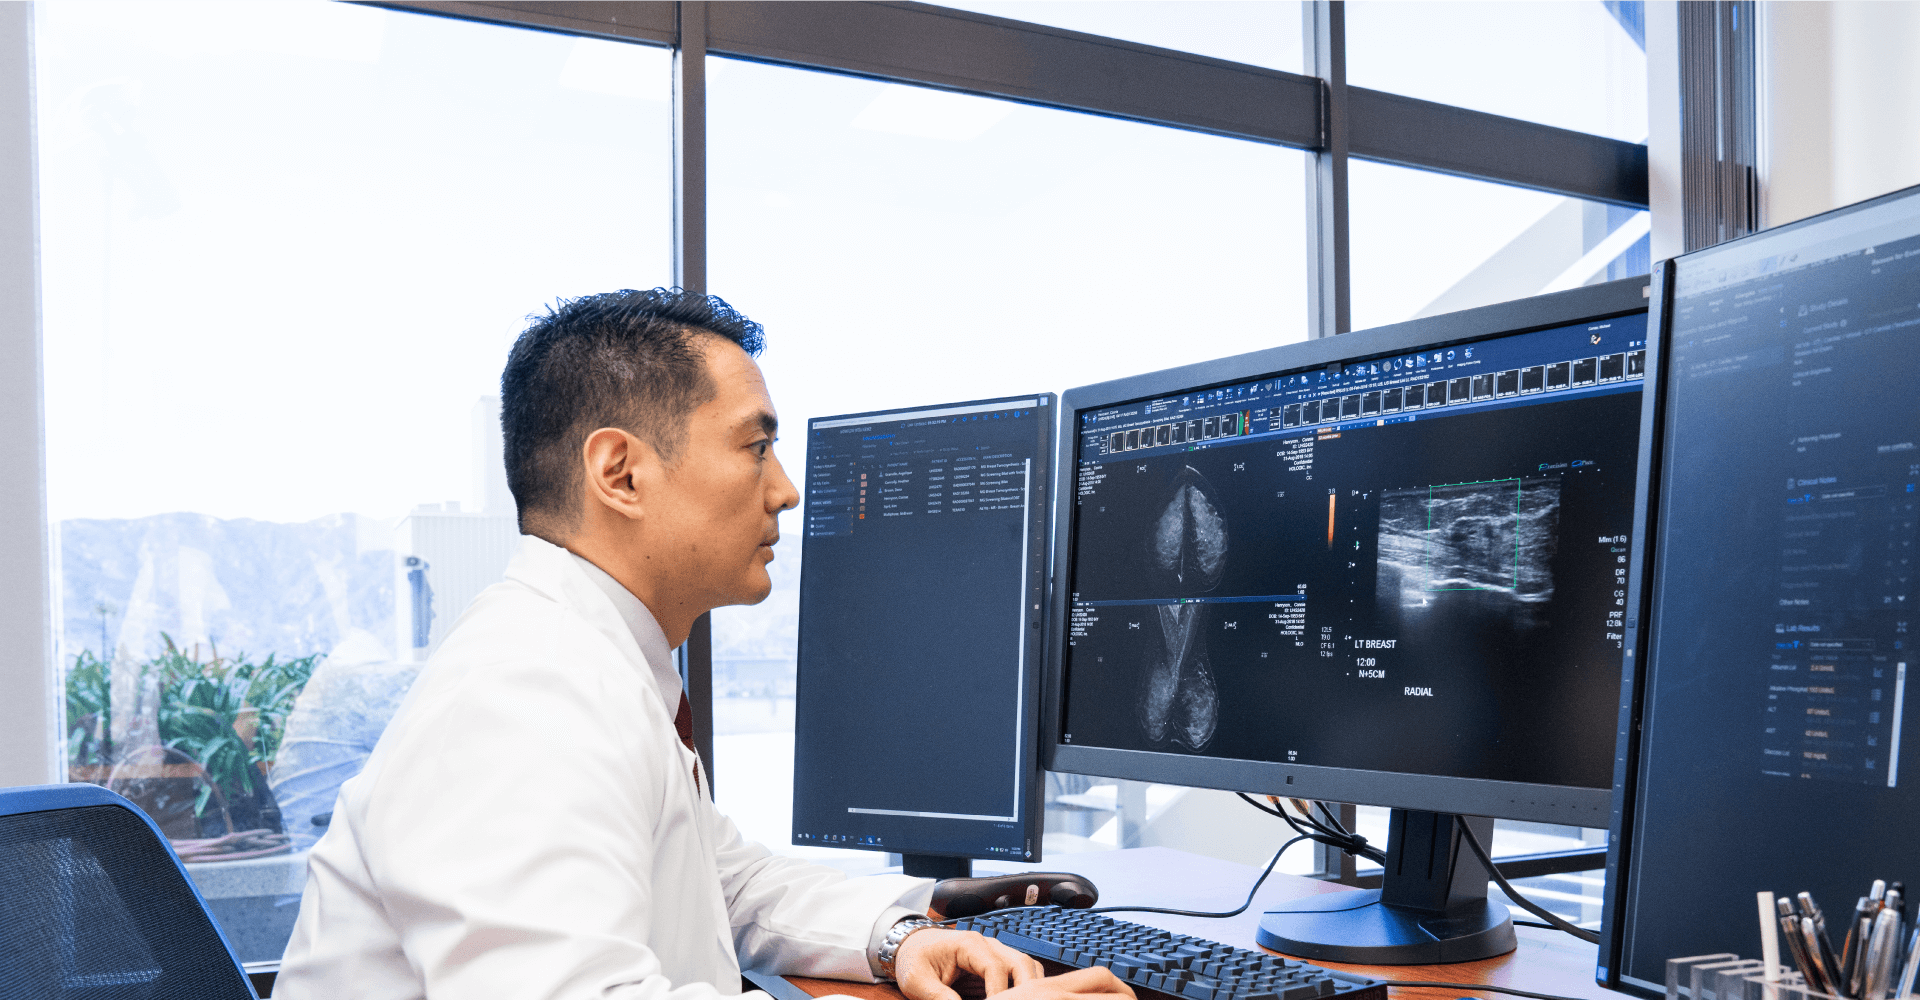 Doctor looking at images on 3 computer screens